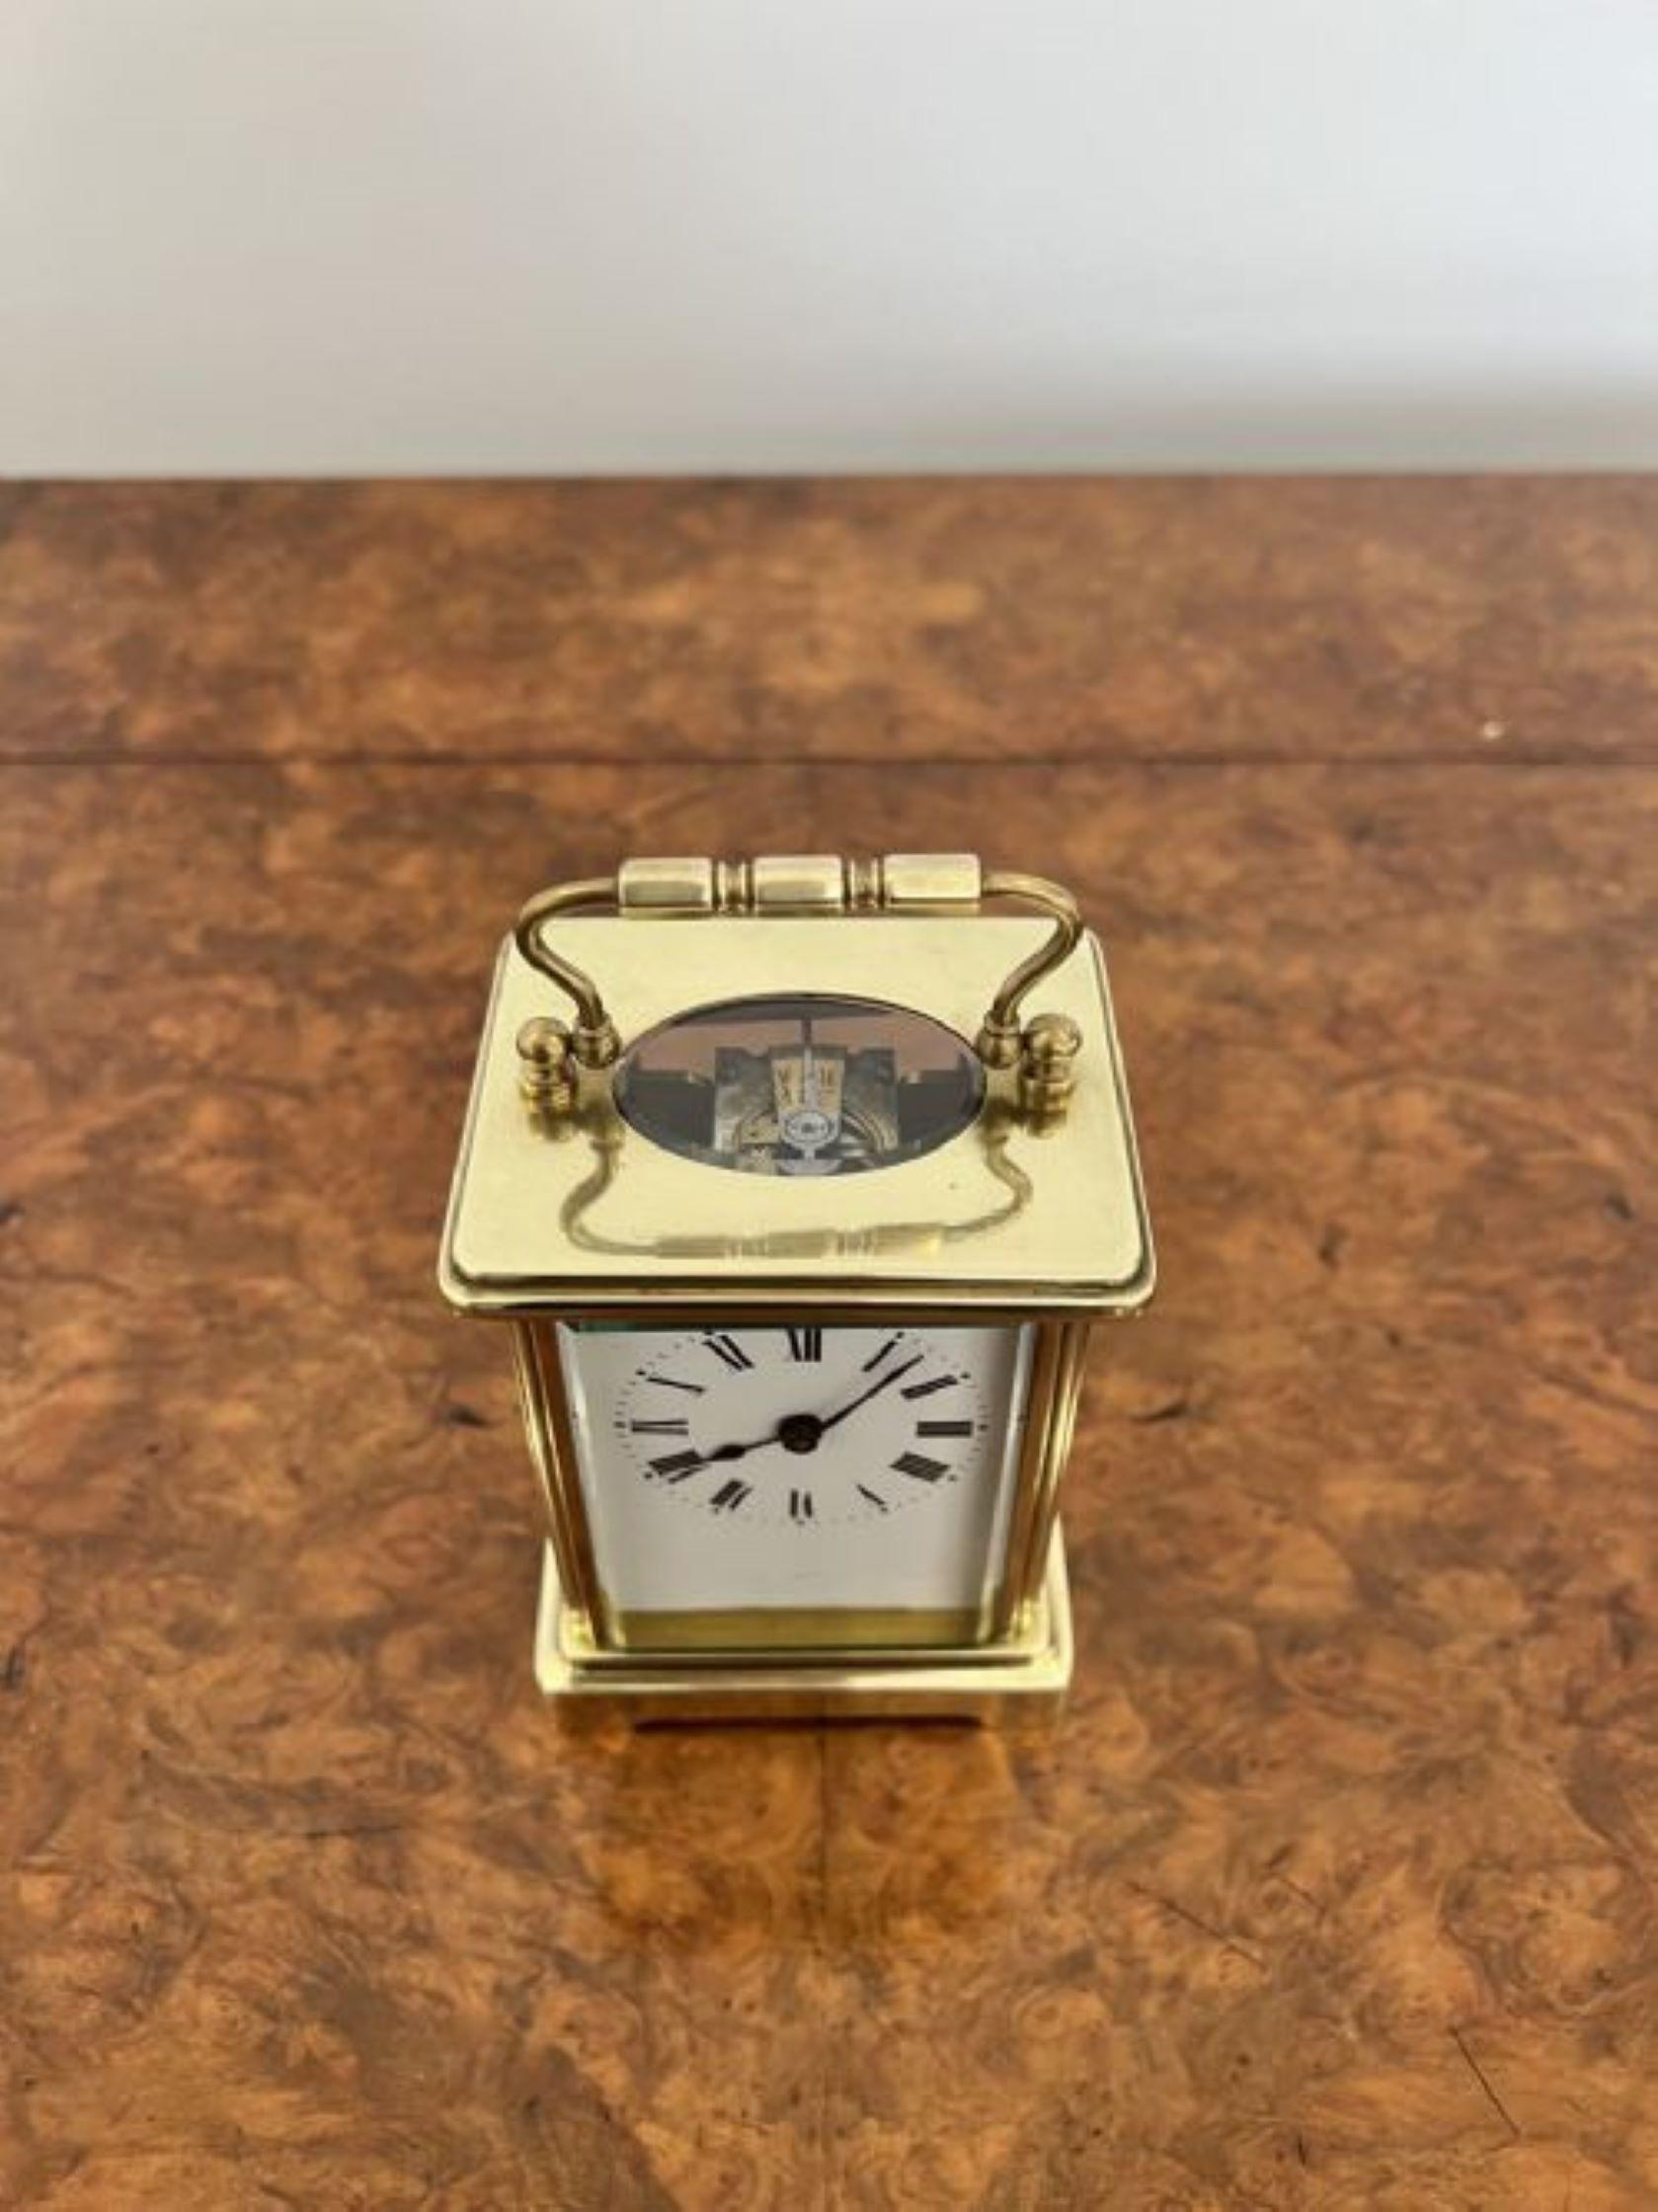 Antique Victorian quality French brass carriage clock having a quality brass case with bevelled glass, white enamel dial with original hands and key, eight day French movement and a handle to the top of the case. 
Please note all of our clocks are